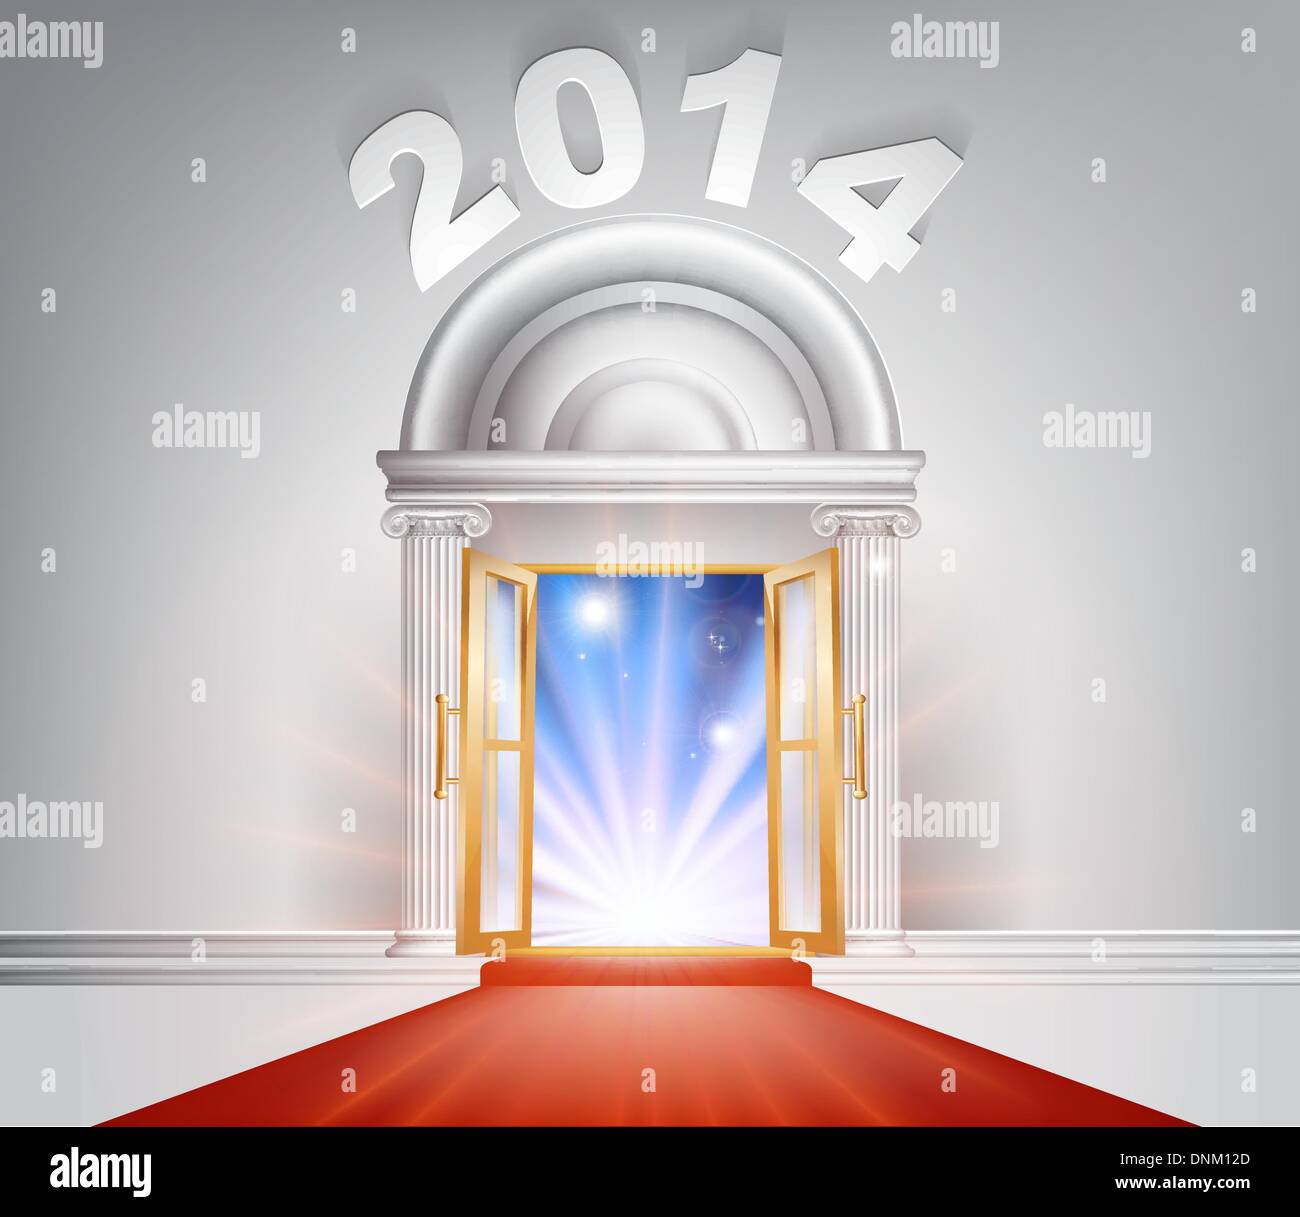 New Year Door 2014 concept of a fantastic white marble door with columns and a red carpet with light streaming through it. Stock Vector